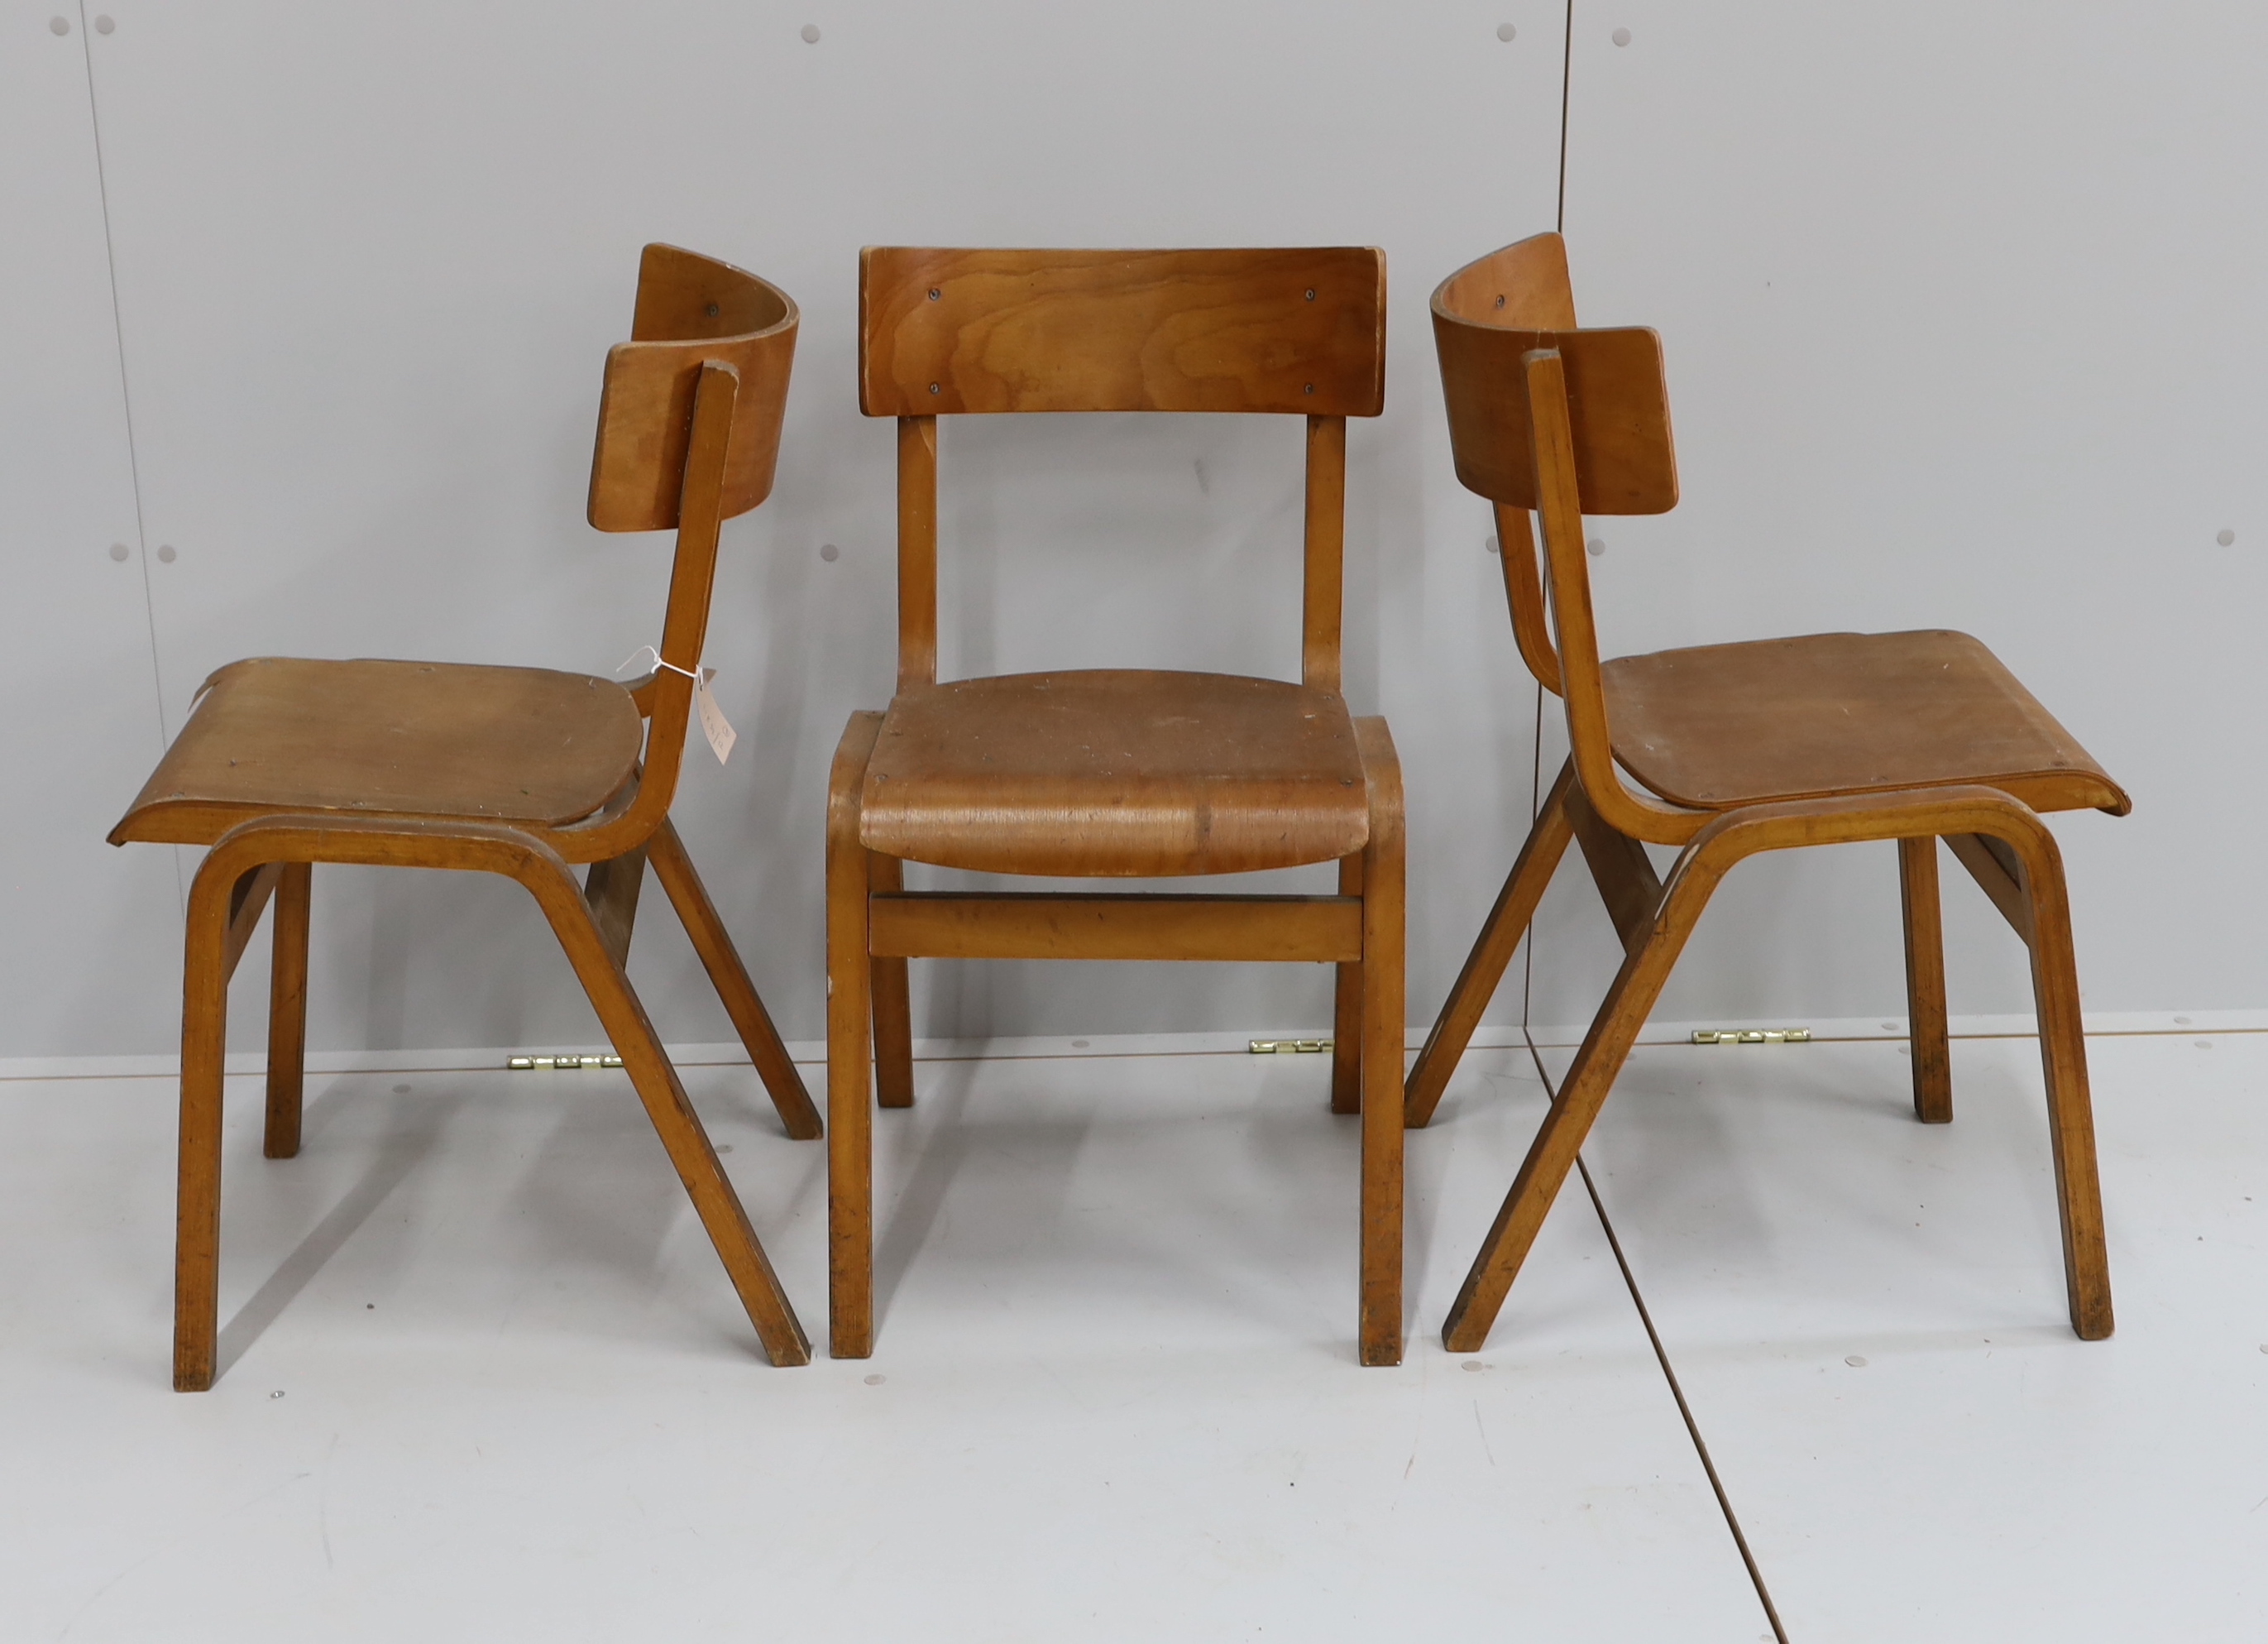 A set of three mid century bent ply chairs                                                                                                                                                                                  